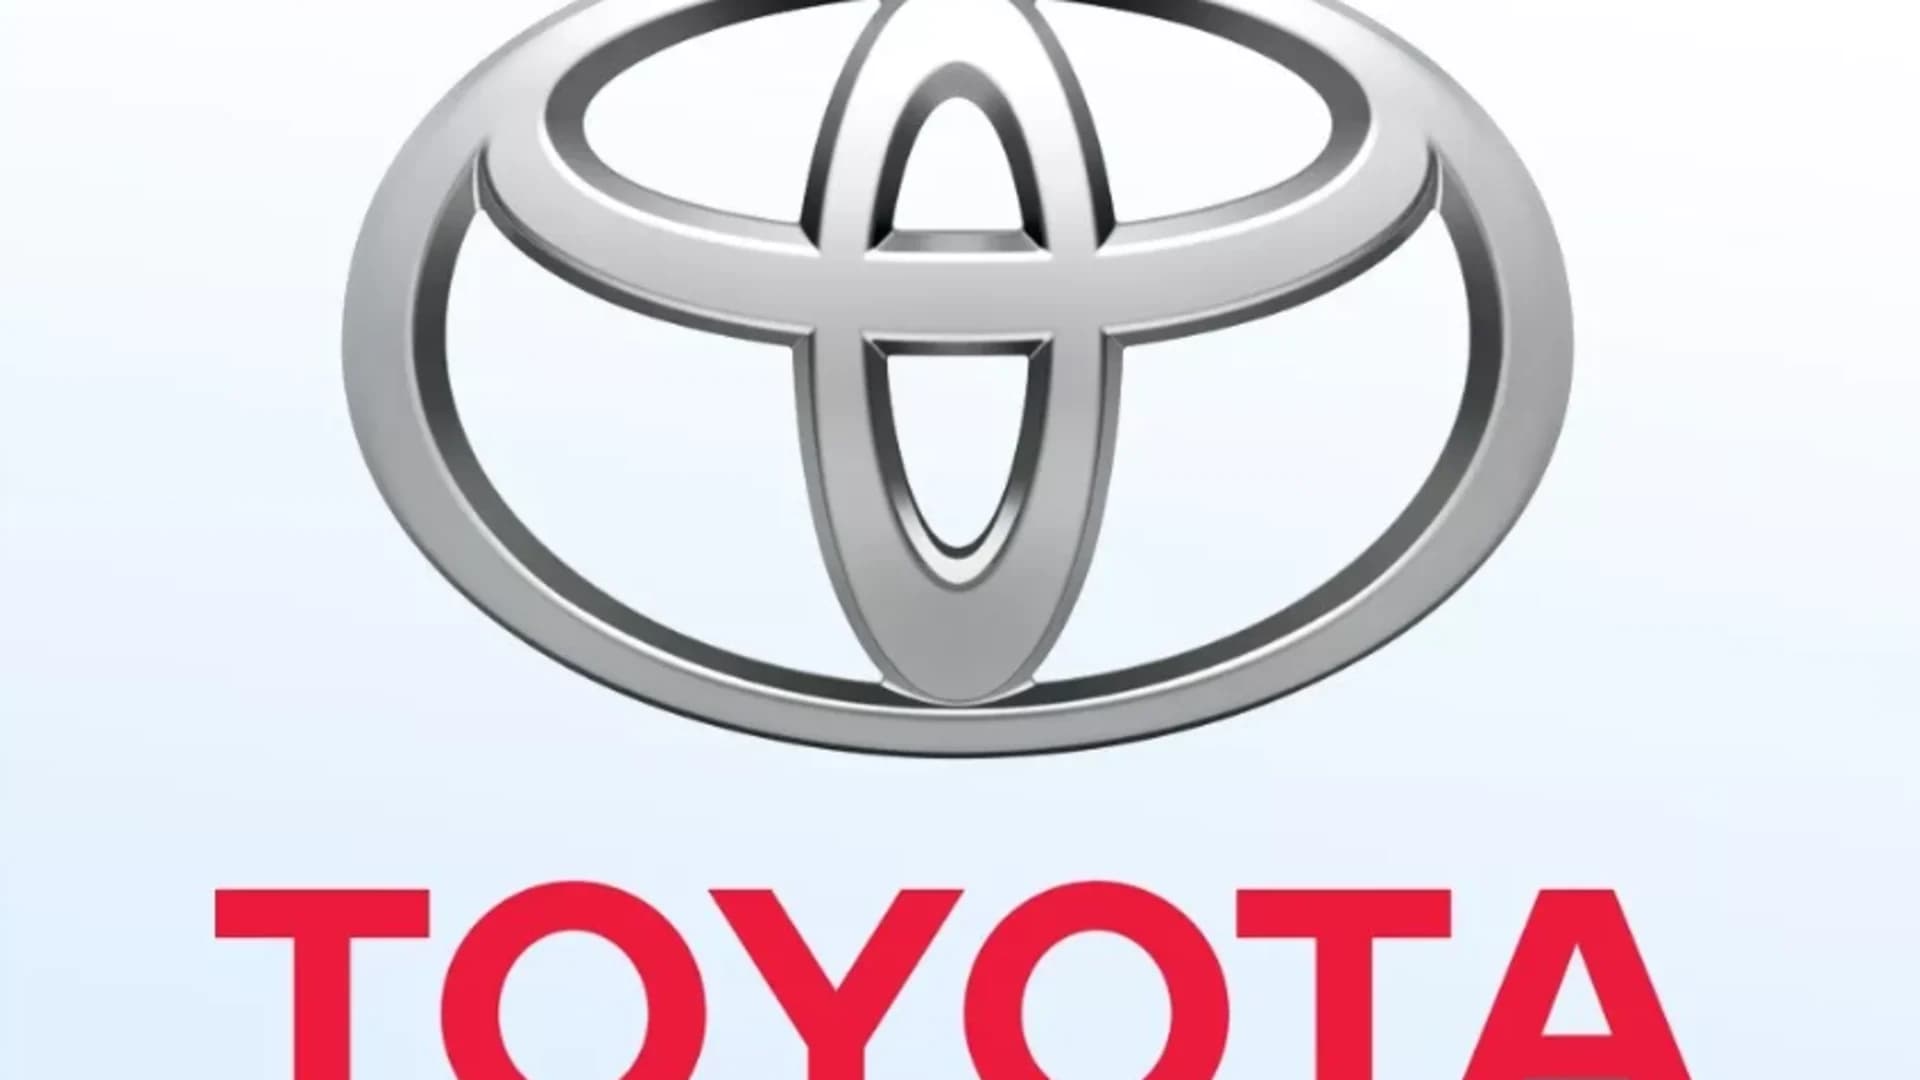 Toyota recalls over 1M vehicles due to air bag problems